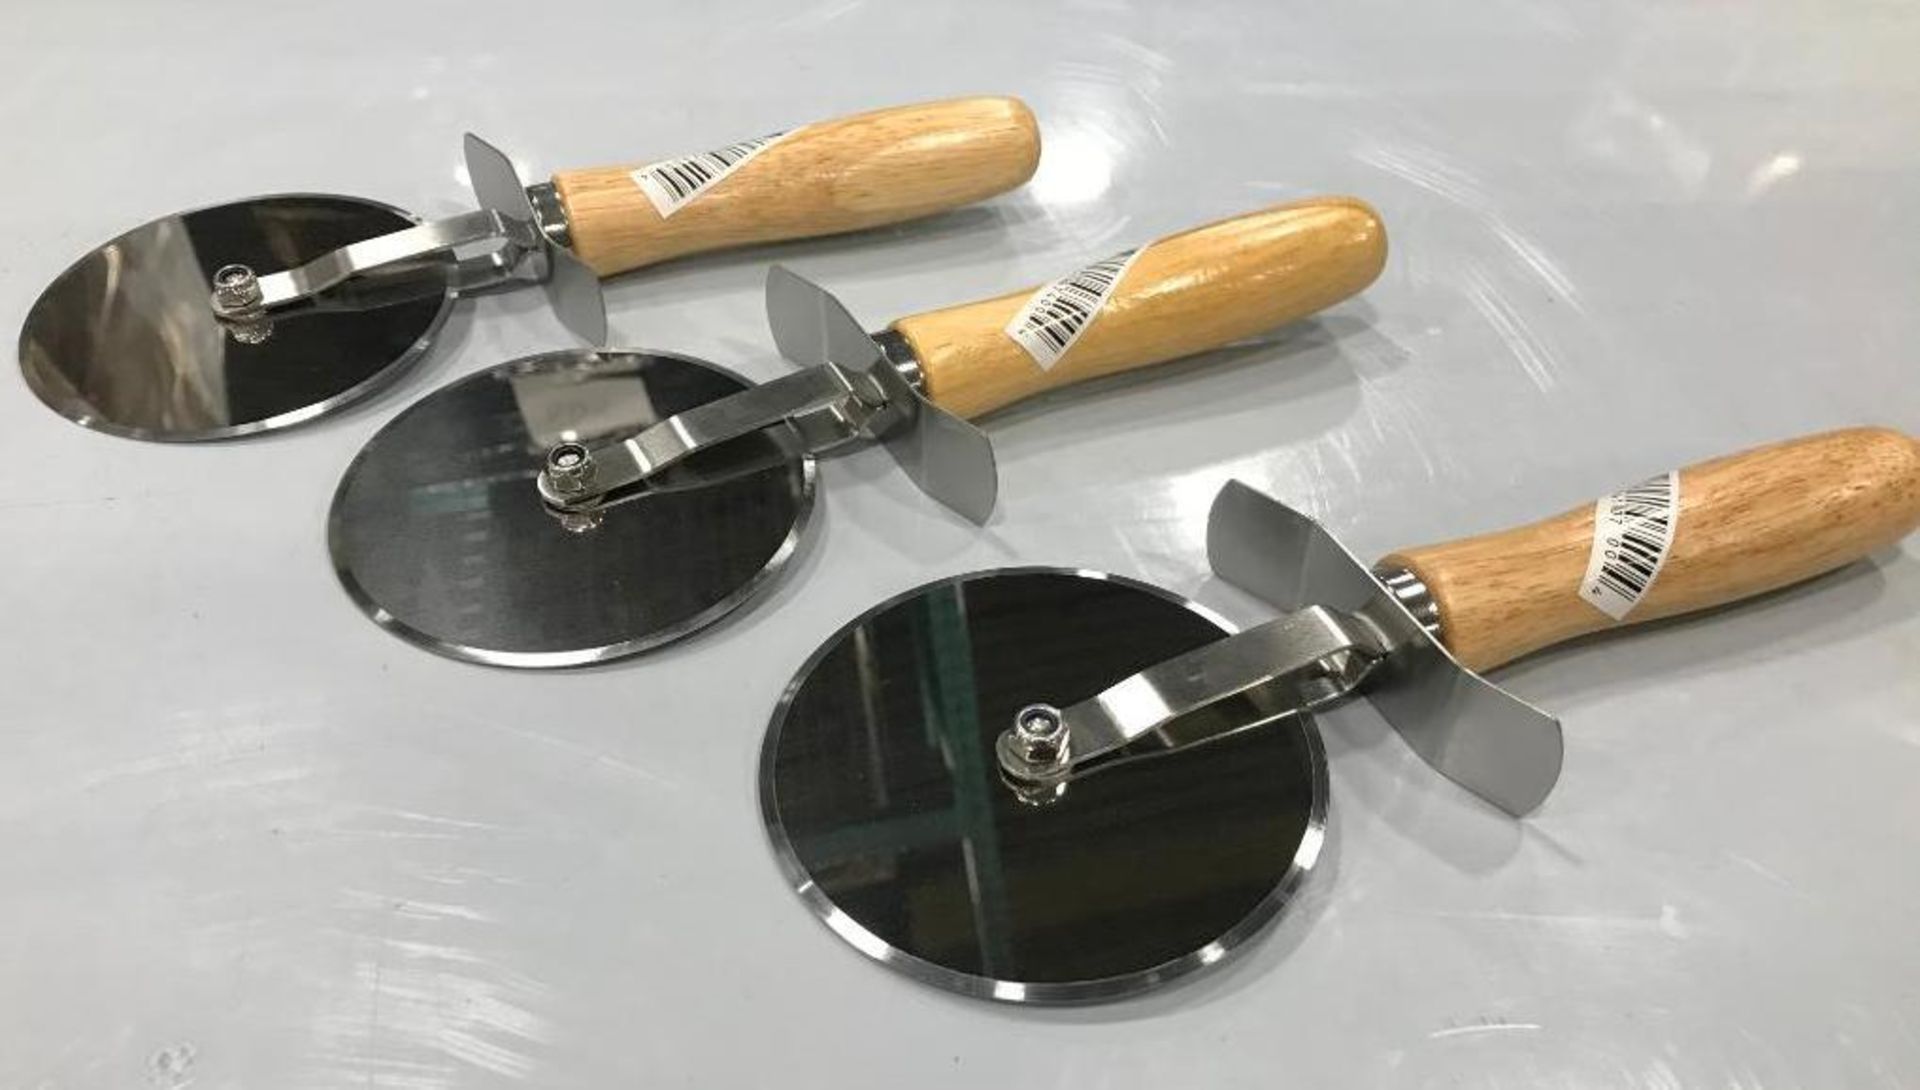 4" PIZZA CUTTER WITH WOODEN HANDLE, JOHNSON ROSE 7400, LOT OF 3 - NEW